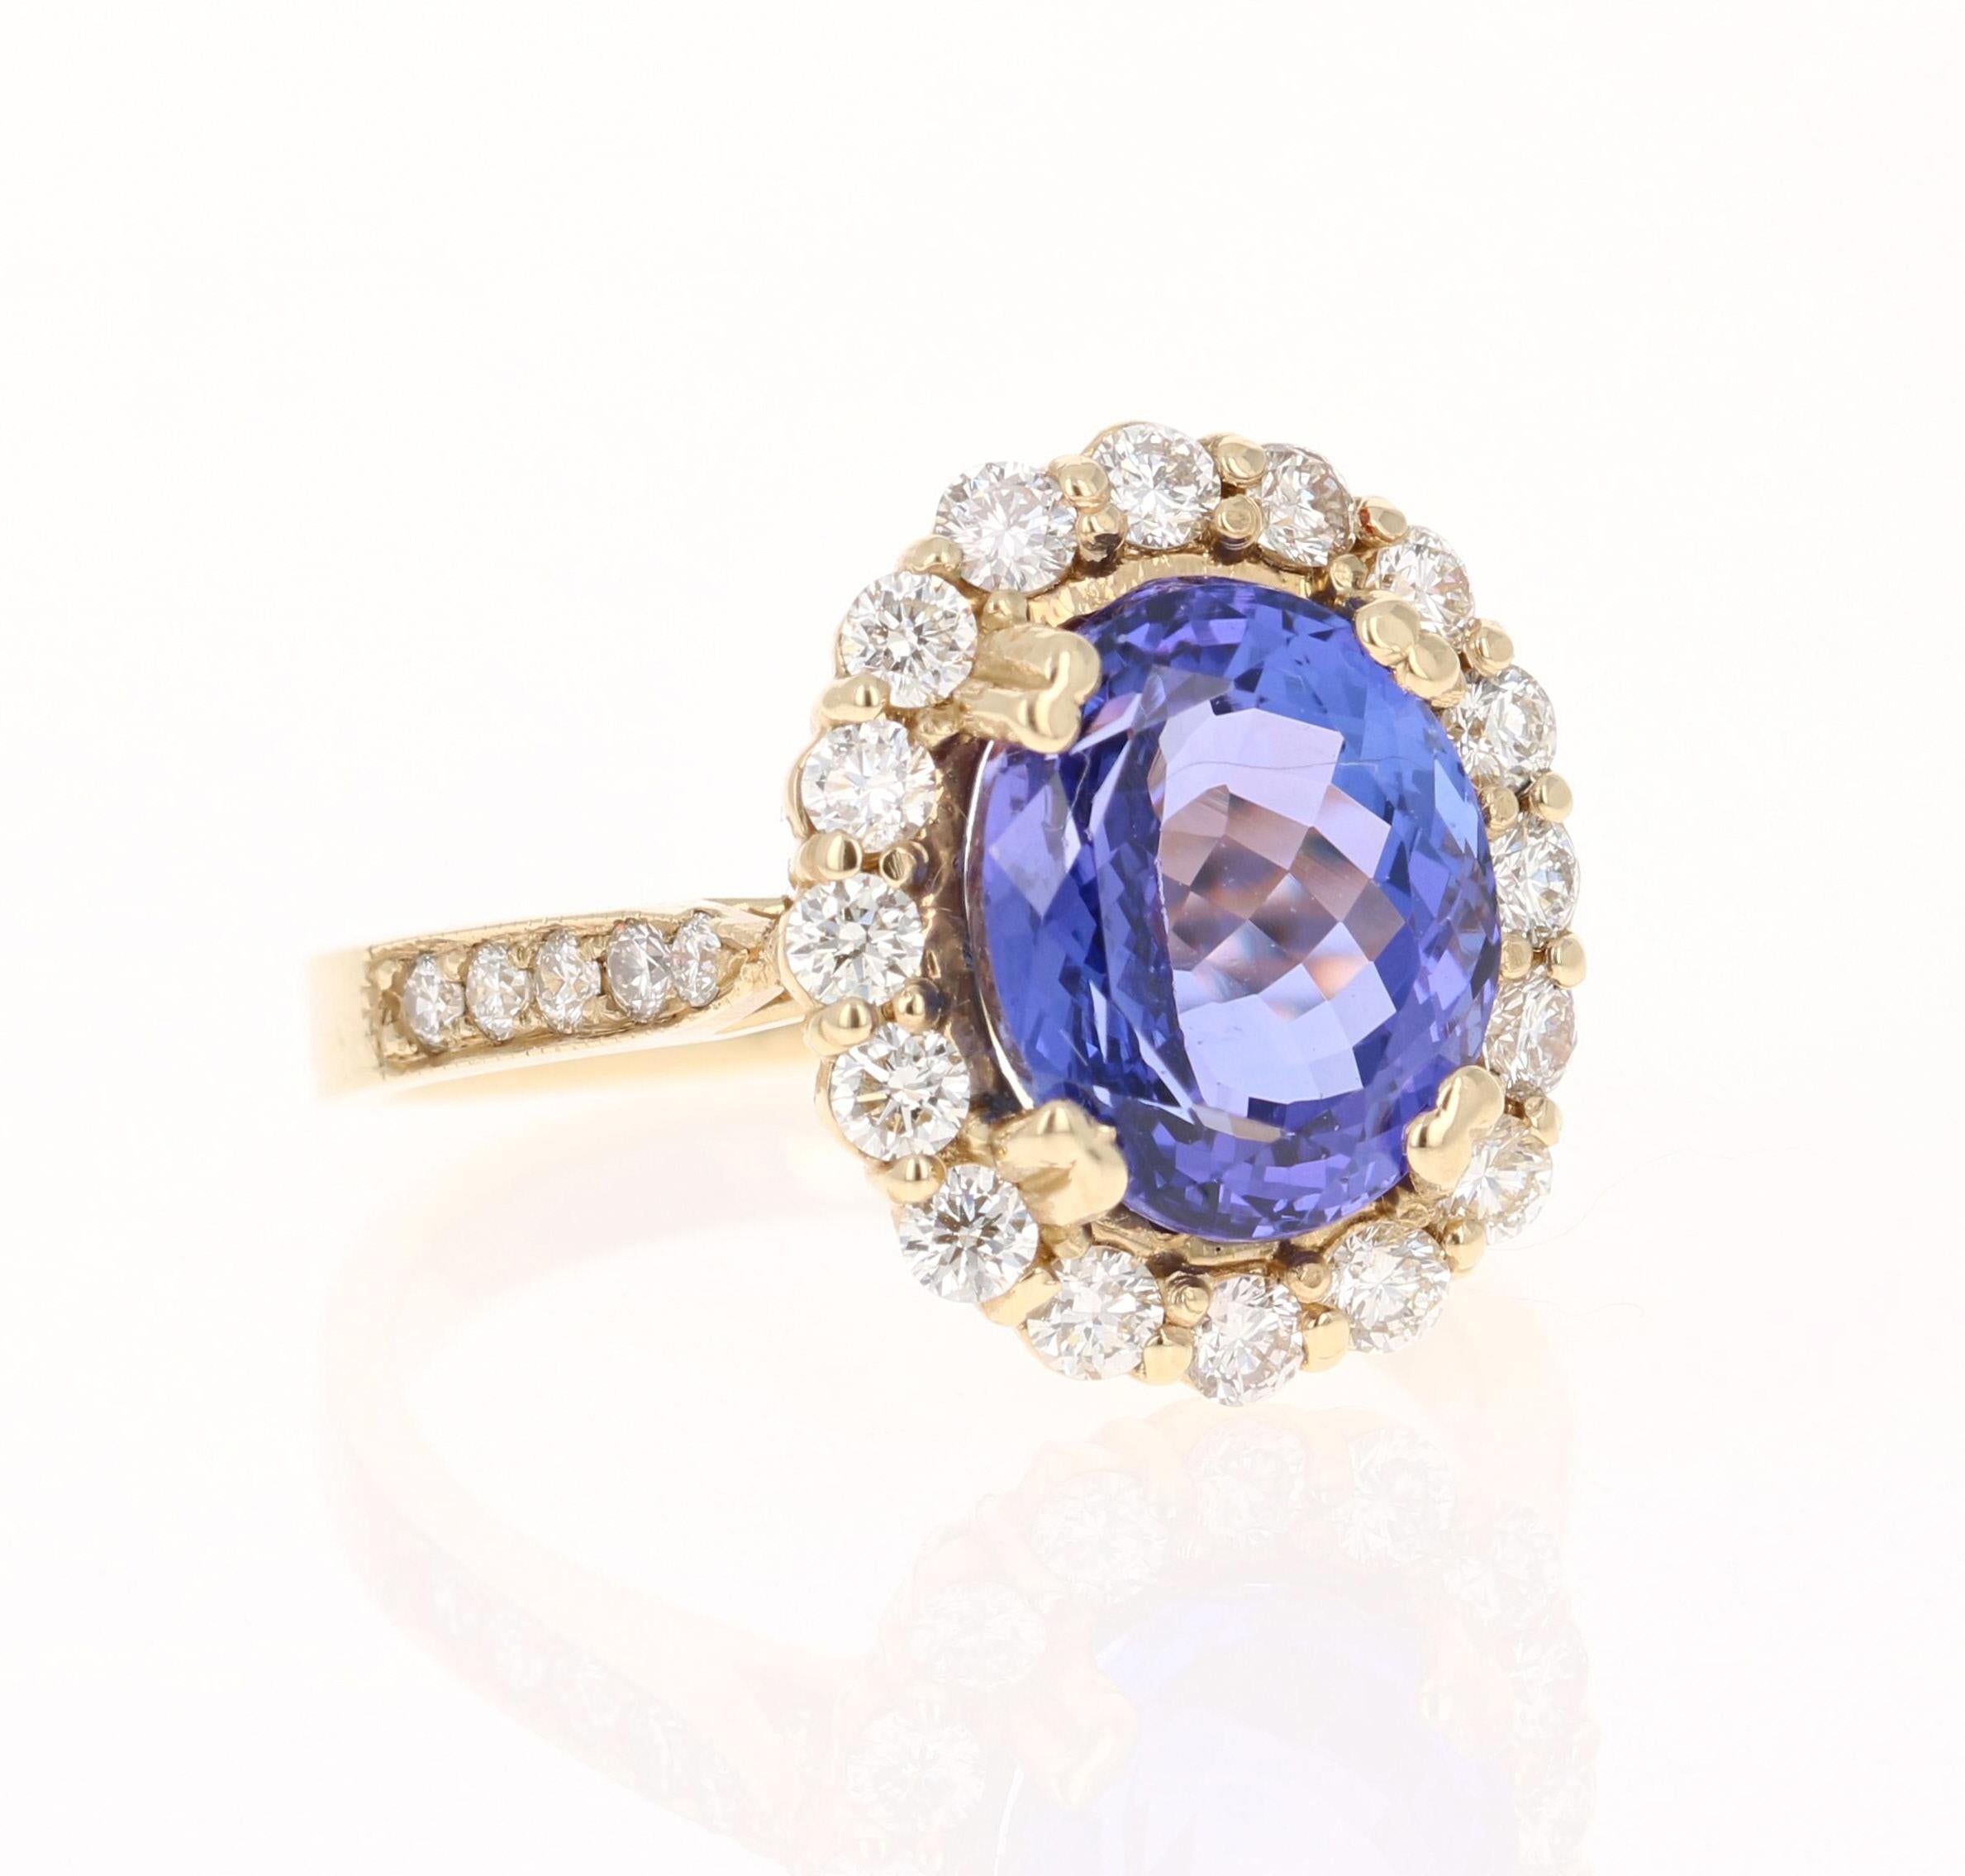 This beautiful ring has a vivid 4.56 Carat Oval Cut Tanzanite. The Tanzanite is surrounded by 26 Round Cut Diamonds that weigh 0.86 carats. (Clarity: VS, Color: H) The total carat weight of the ring is 5.42 carats. The Oval Cut Tanzanite measures at